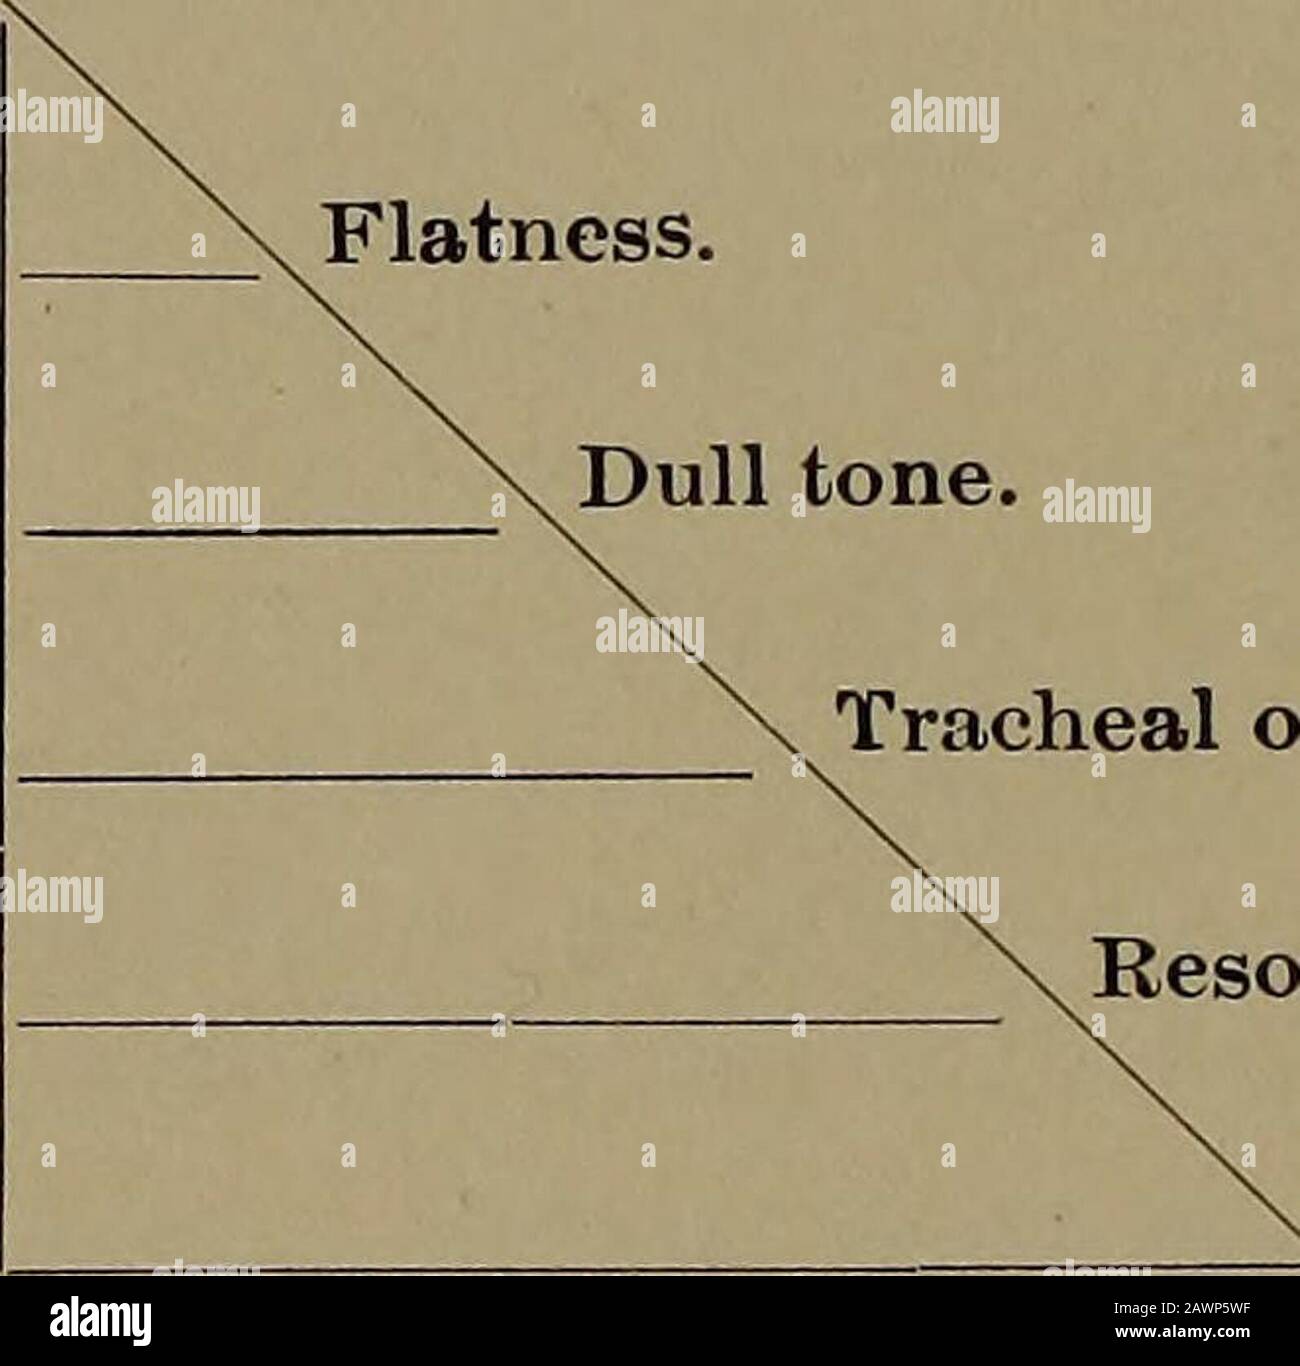 Physical diagnosis, including diseases of the thoracic and abdominal organs : a manual for students and physicians .. . physical condition of thepart percussed. The duration of sound depends upon the length of thewaves and their persistence, and varies directly withthe pitch and intensity. Fig. 22. Flatness. Dull tone. Tracheal or tubular tone.Resonant tone. .Tympanitic tone.Volume and duration.Diagrammatic sketch of the relations of the elements of tone. The perpen-dicular line represents the pitch. The transverse line thevolume and duration. The elements of sound have a definite relationship Stock Photo